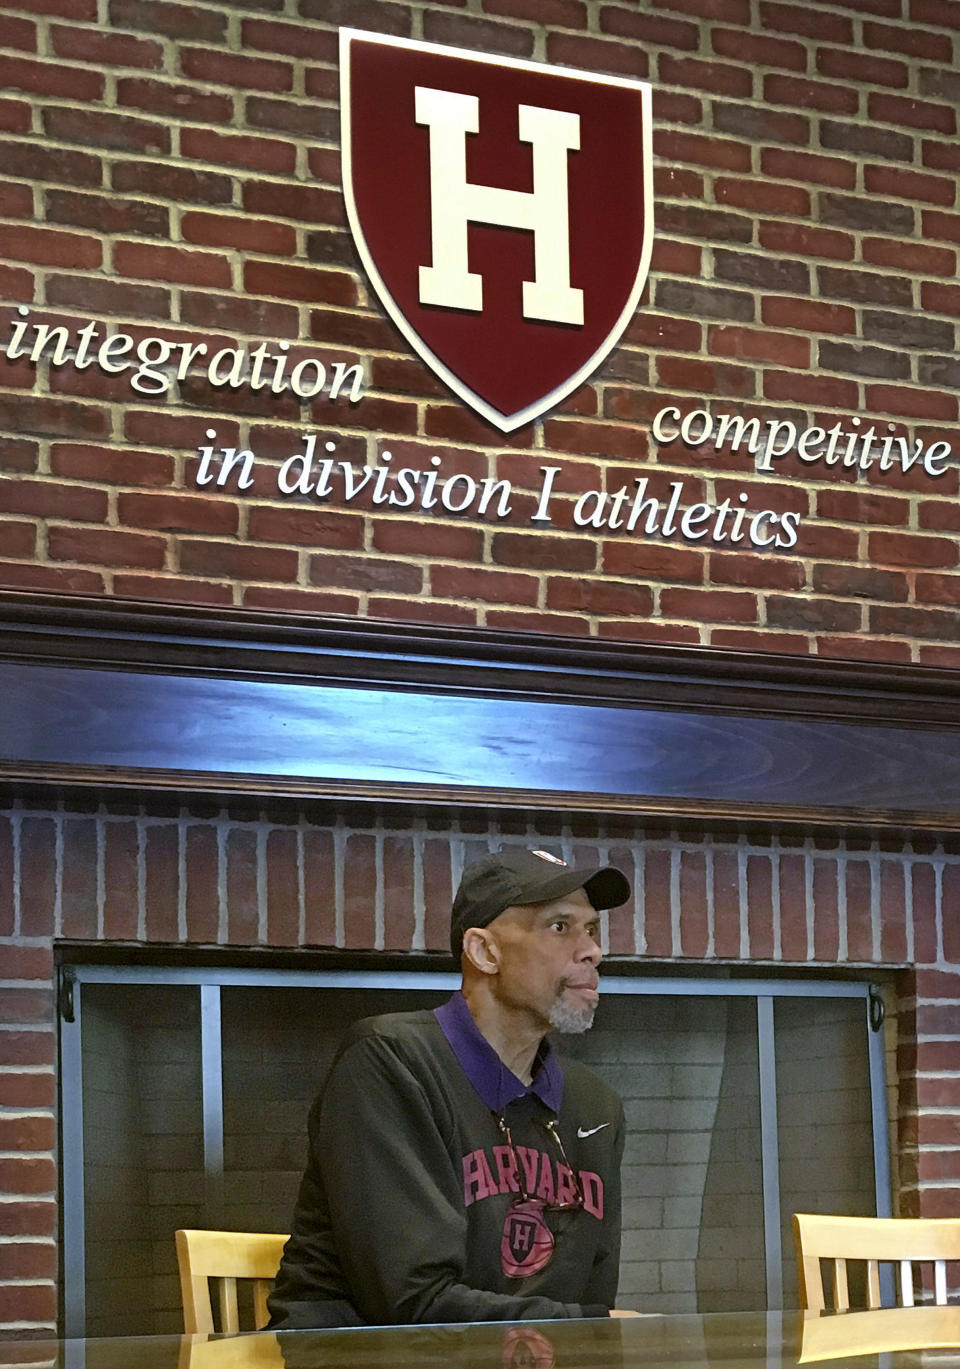 FILE - In this Saturday, Oct. 29, 2016, file photo, basketball Hall of Famer Kareem Abdul-Jabbar speaks at Harvard in Cambridge, Mass. When George Floyd died in spring 2020, under a policeman's knee, Harvard basketball coach Tommy Amaker knew it was time to get to work. “He wants the team to reflect Harvard’s best efforts to show diversity,” said Abdul-Jabbar, who spoke to the team in 2016. (AP Photo/Jimmy Golen, File)